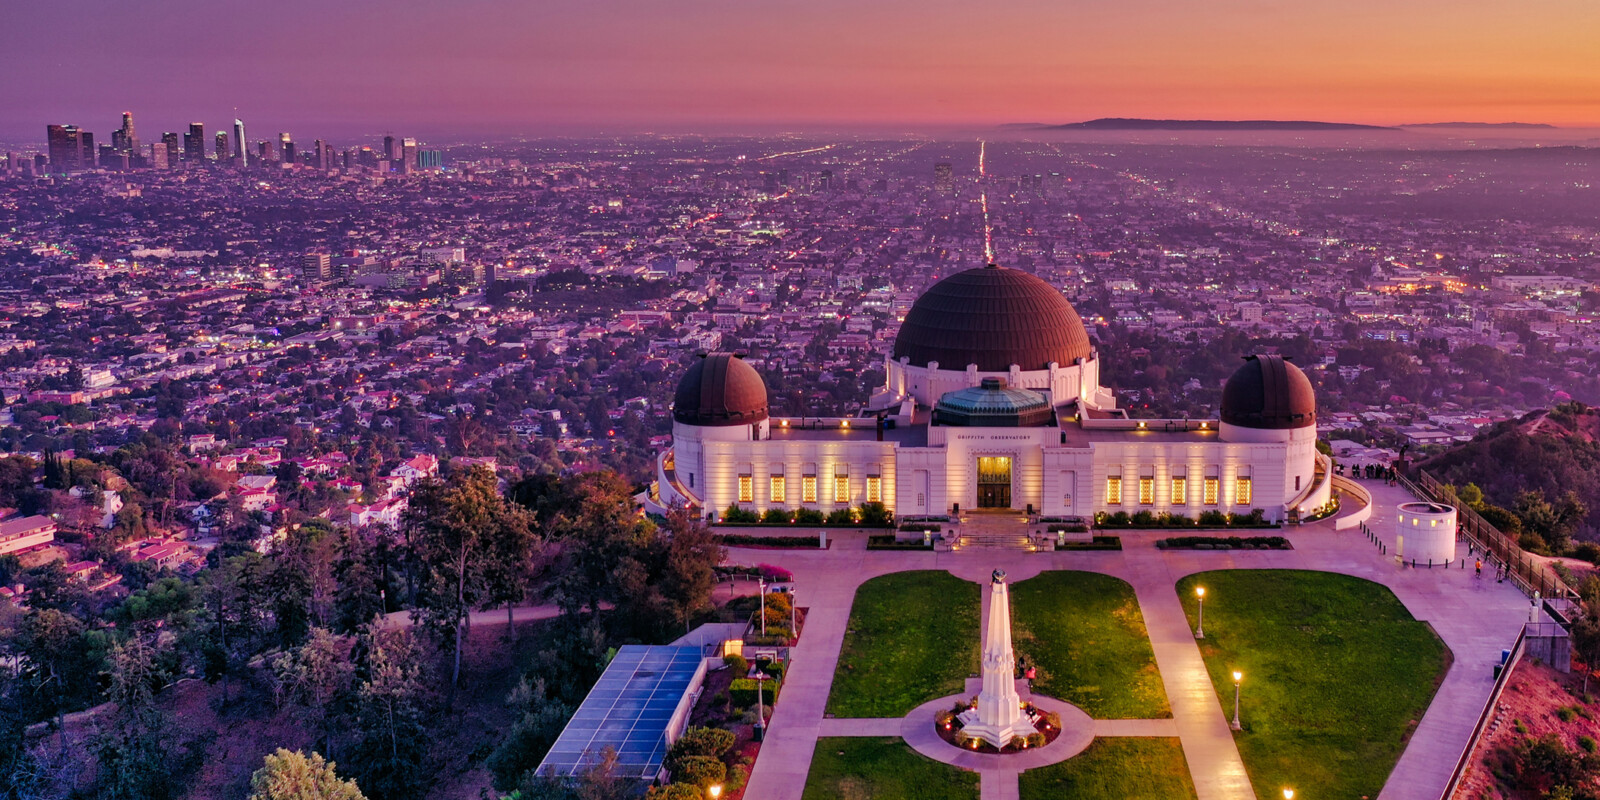 Griffith Observatory - Southern California's gateway to the cosmos!